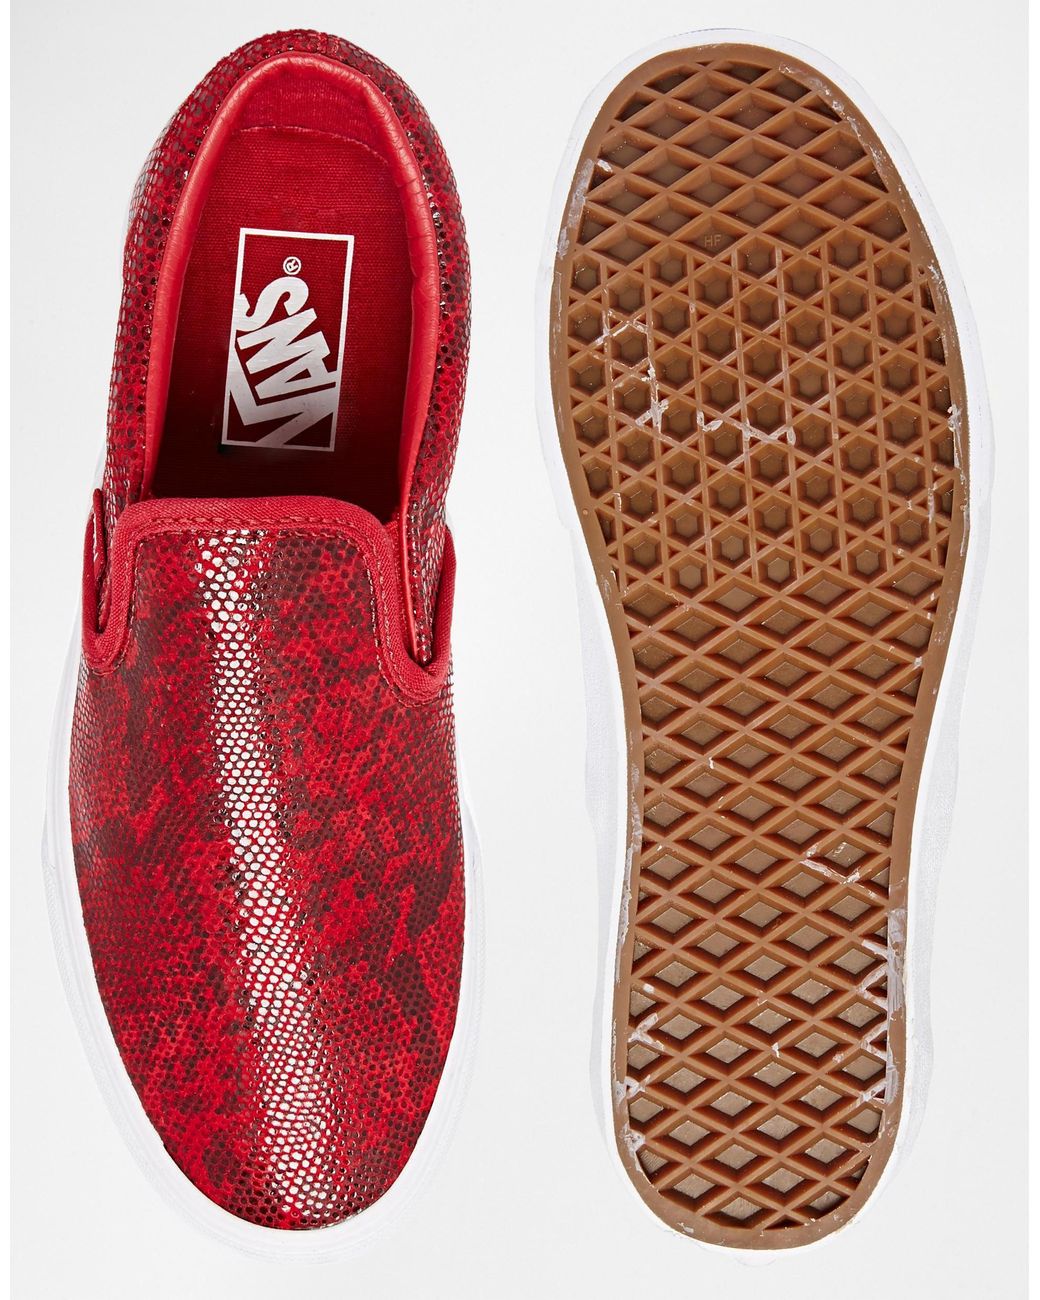 Vans Classic Pebble Snake Slip On Trainers in Red | Lyst